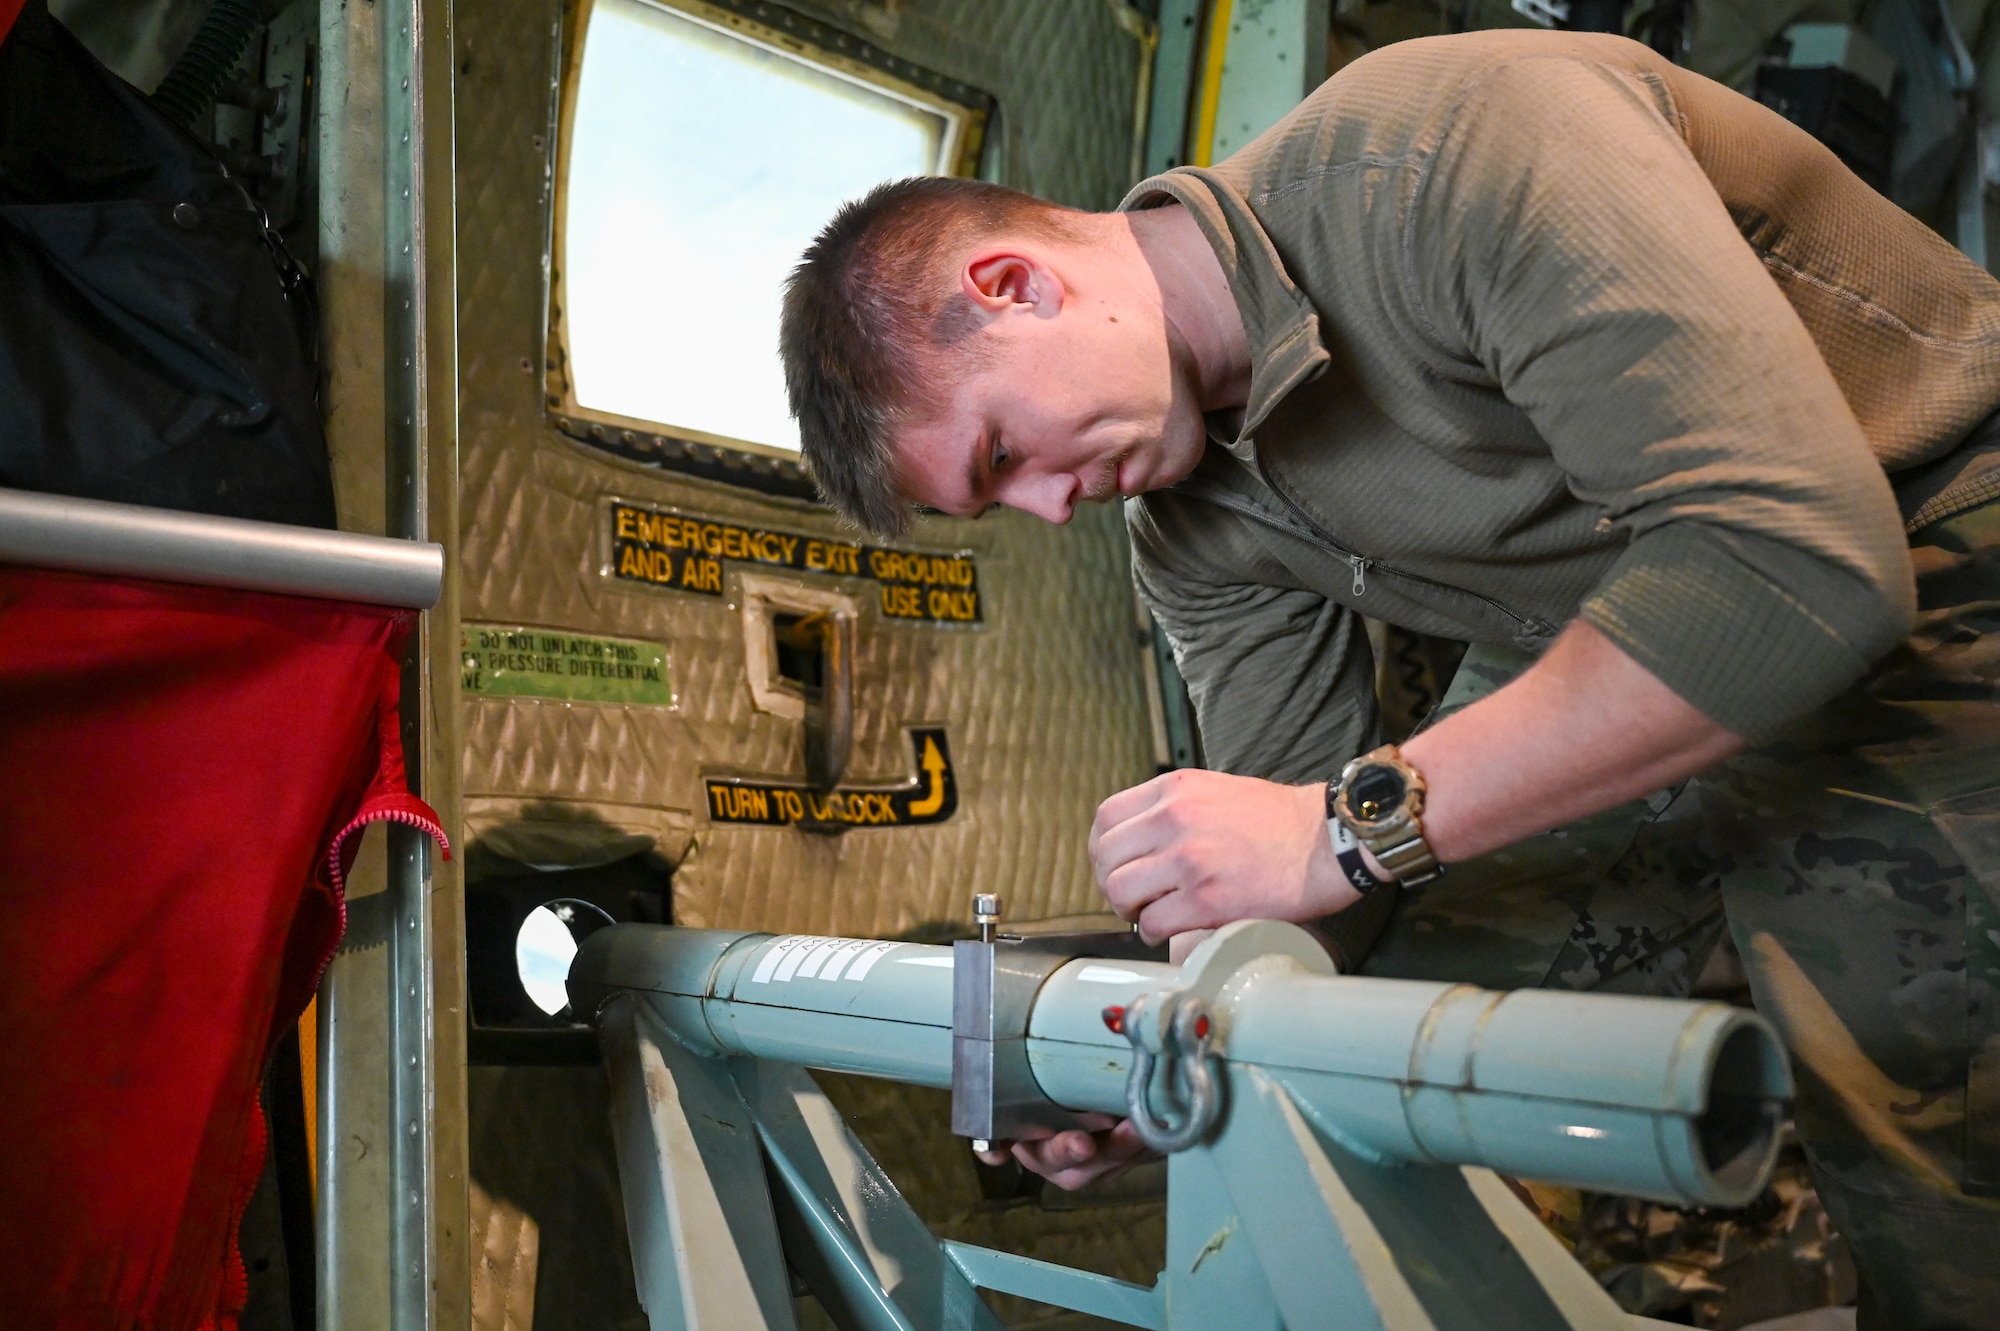 Senior Airman Dylan Miller, an aerial spray system maintainer assigned to the 910th Maintenance Squadron, caps the spray boom sleeve of the 910th Airlift Wing’s electronic modular aerial spray system on board a C-130J-30 Super Hercules aircraft from Keesler Air Force Base, Mississippi, visiting Youngstown Air Reserve Station, Ohio, March 21, 2024.